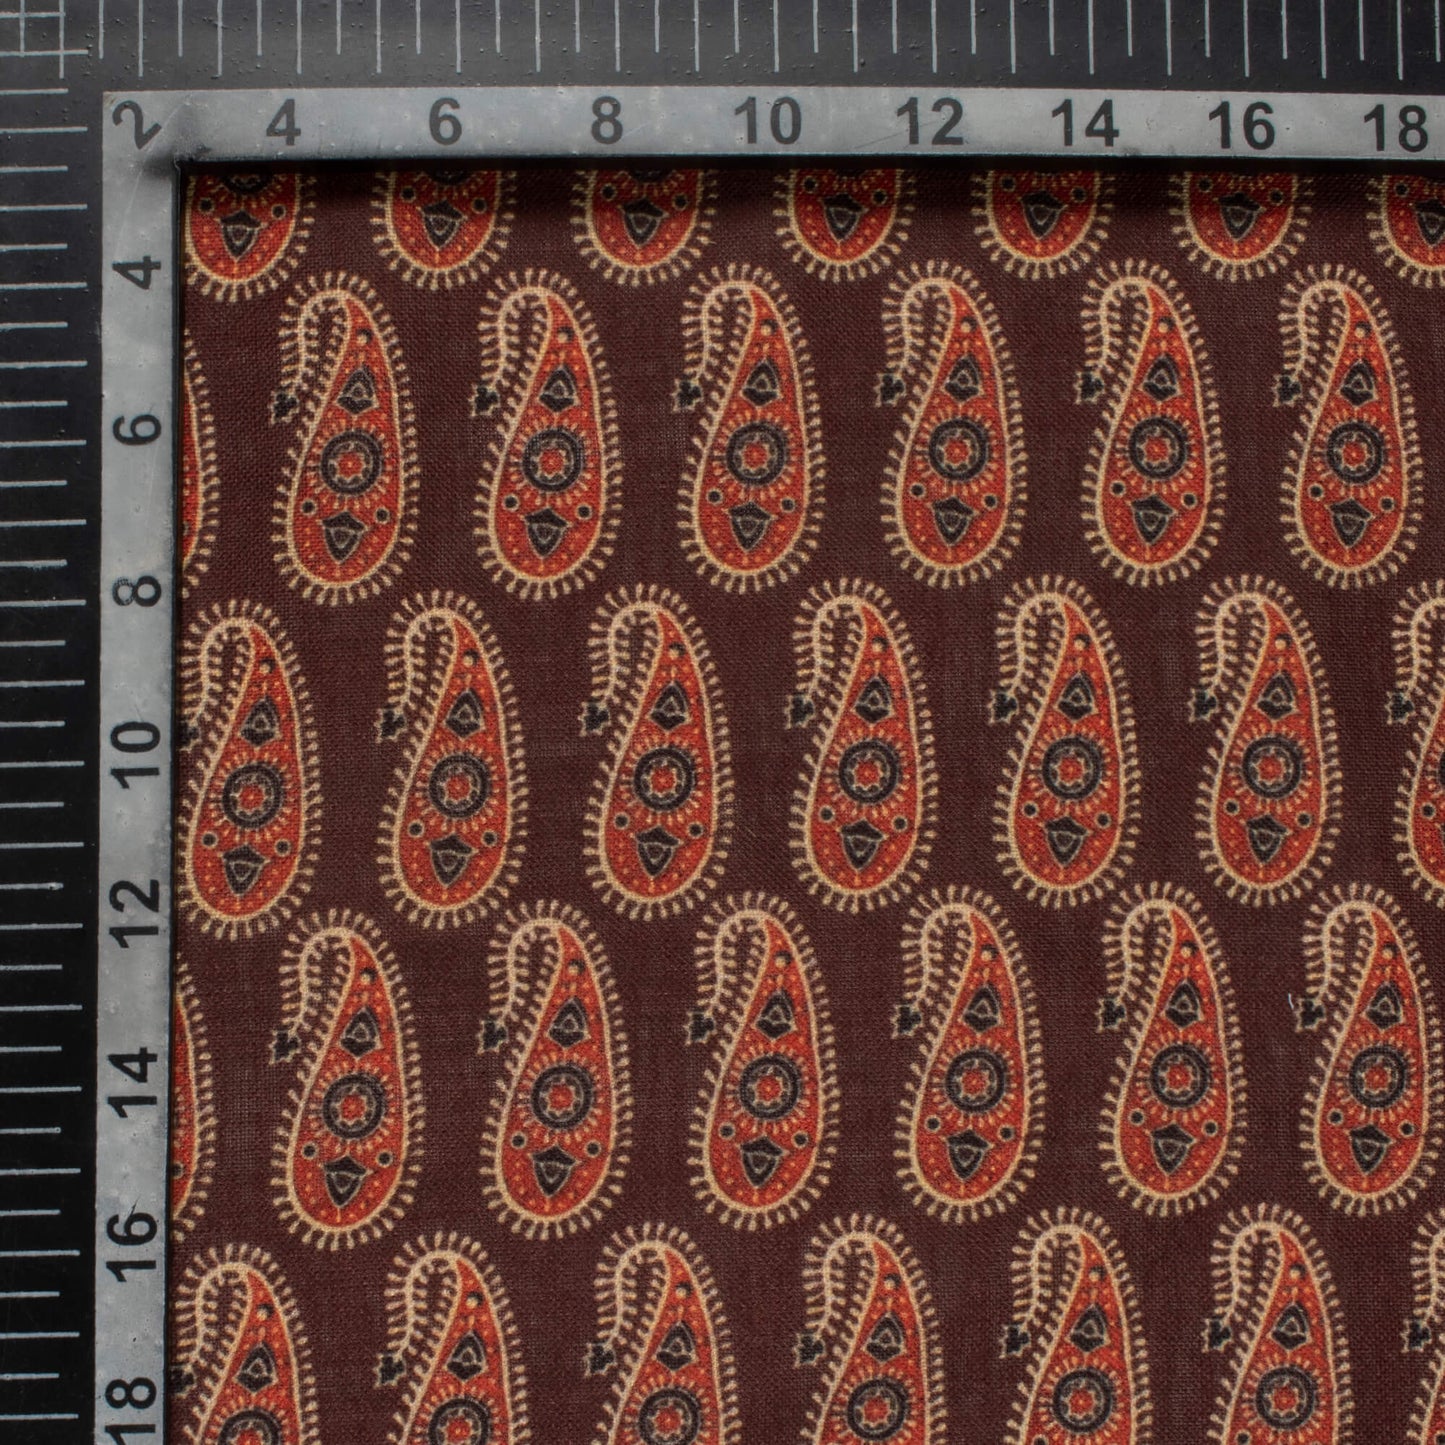 Hickory Brown And Blood Red Paisley Pattern Digital Print Linen Textured Fabric (Width 56 Inches)